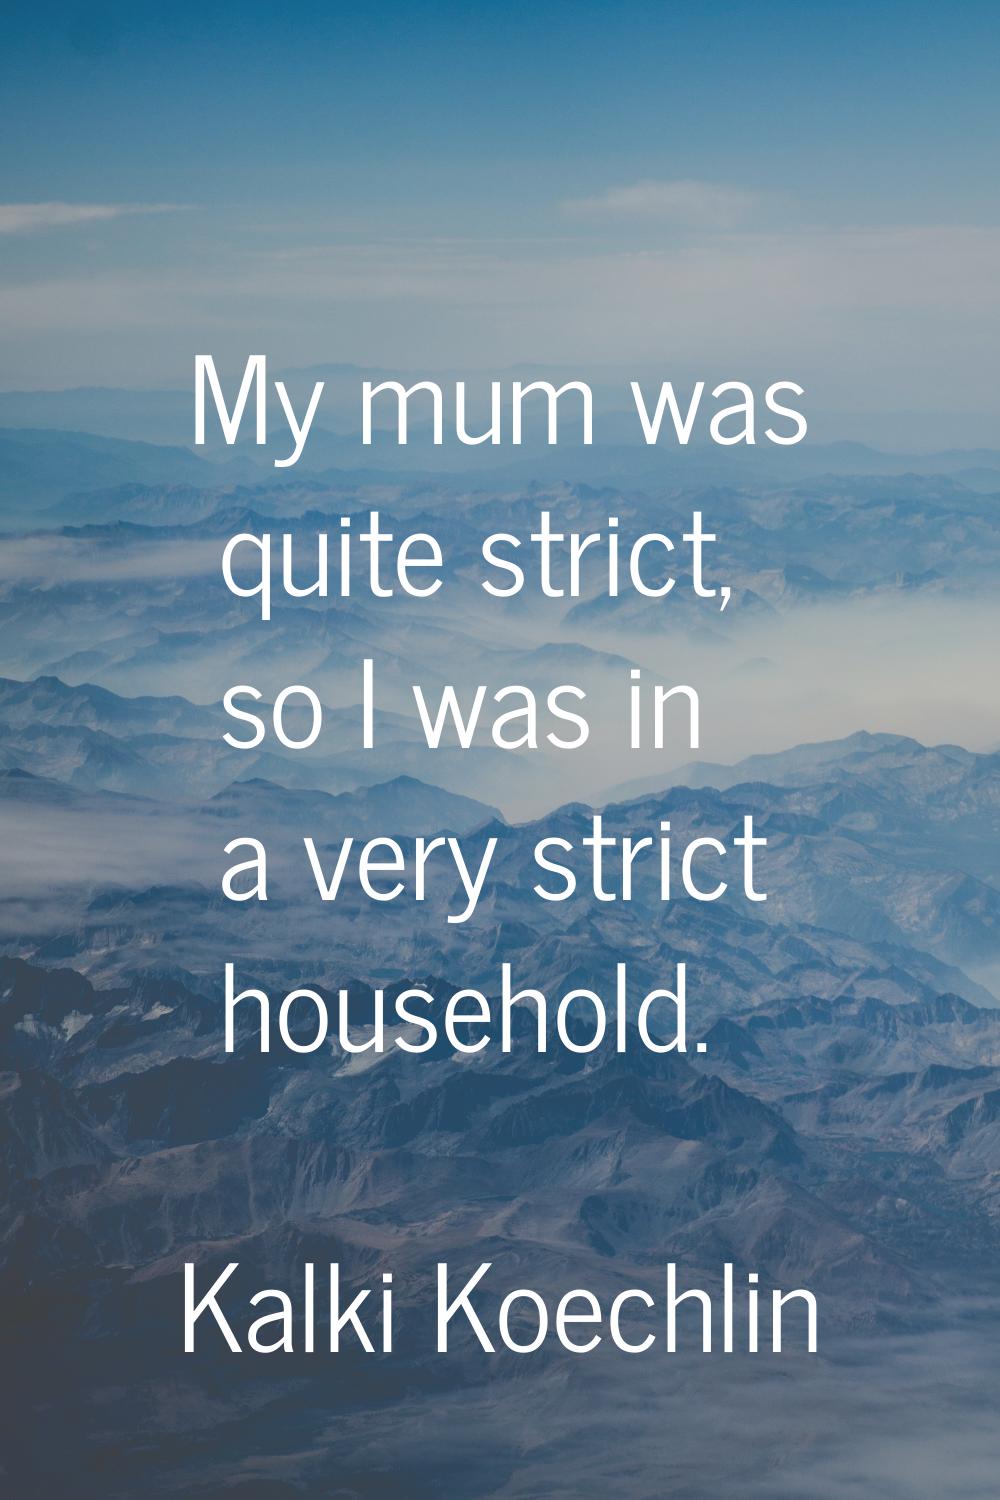 My mum was quite strict, so I was in a very strict household.